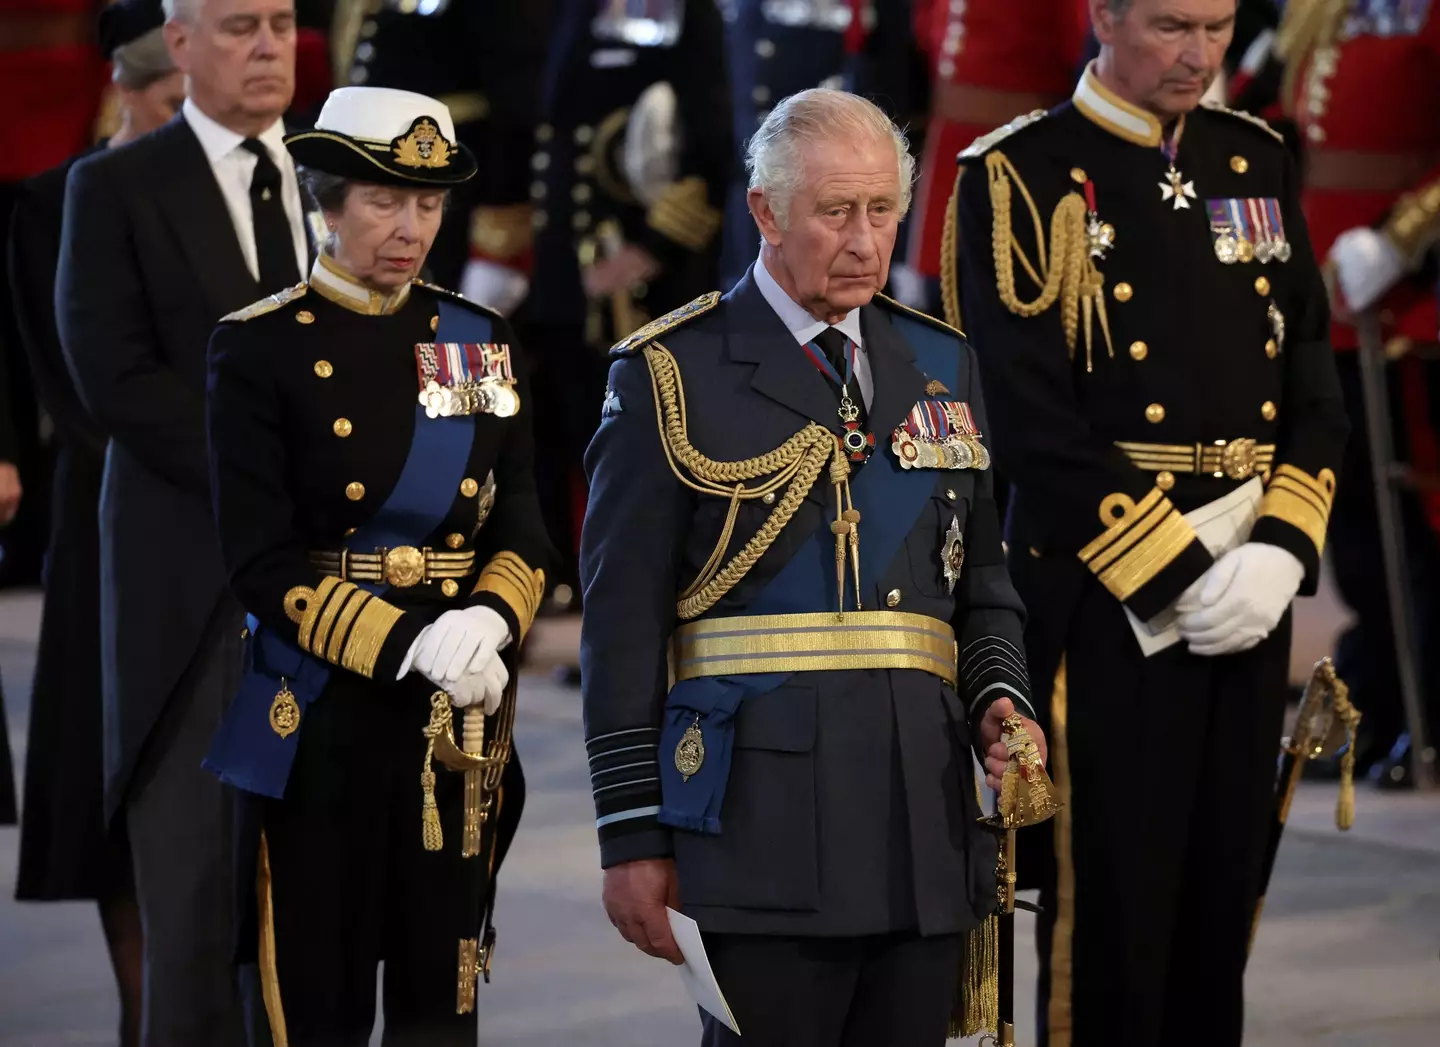 Canadians do not want King Charles III on their money.